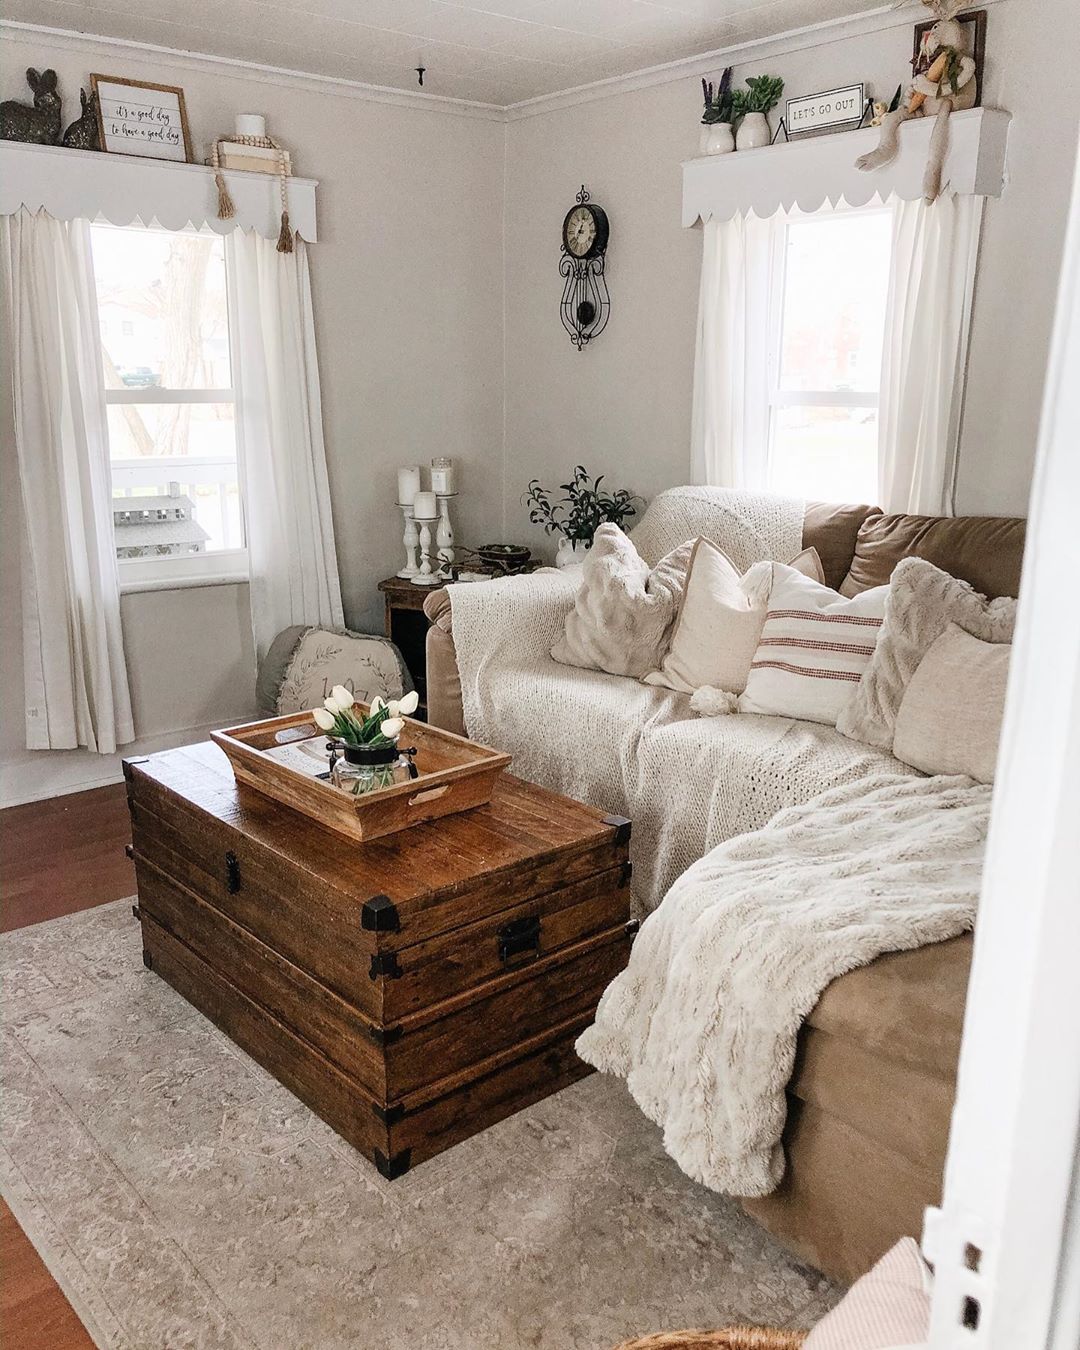 Storage Trunk Used as a Coffee Table in Living Room. Photo by Instagram user @ourhomedays